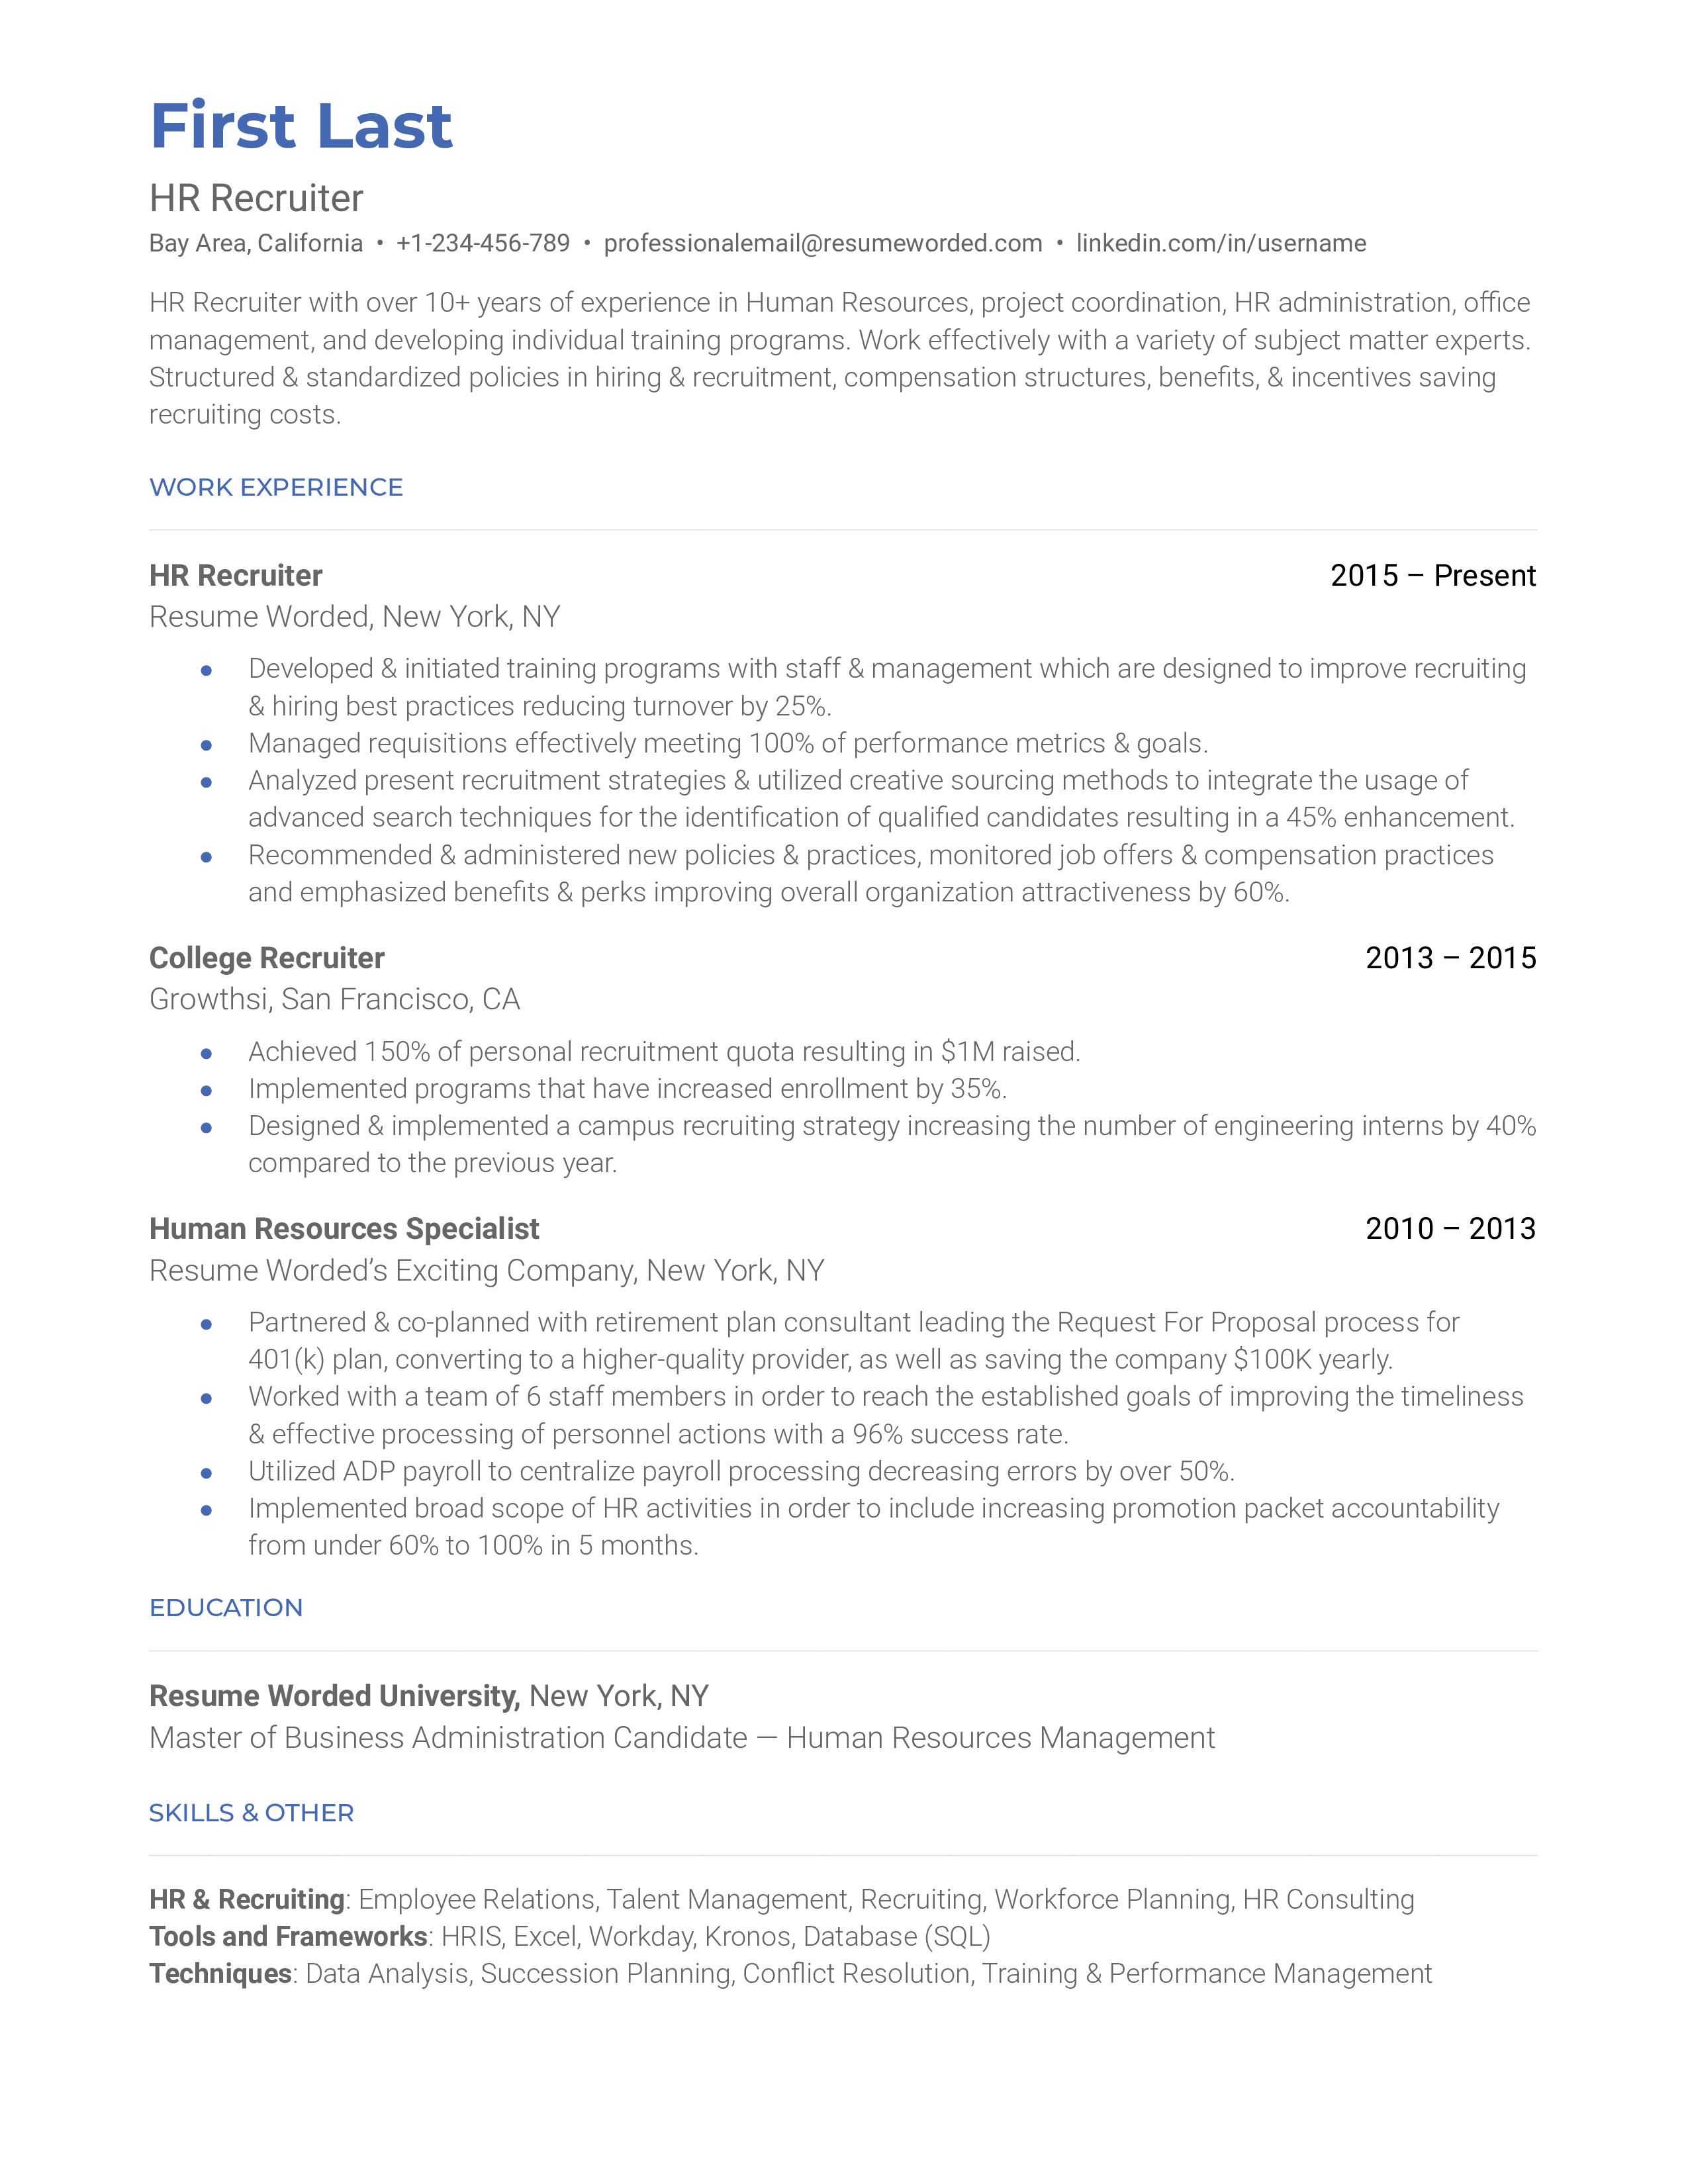 A well-structured CV of an HR Recruiter highlighting relevant skills and experiences.